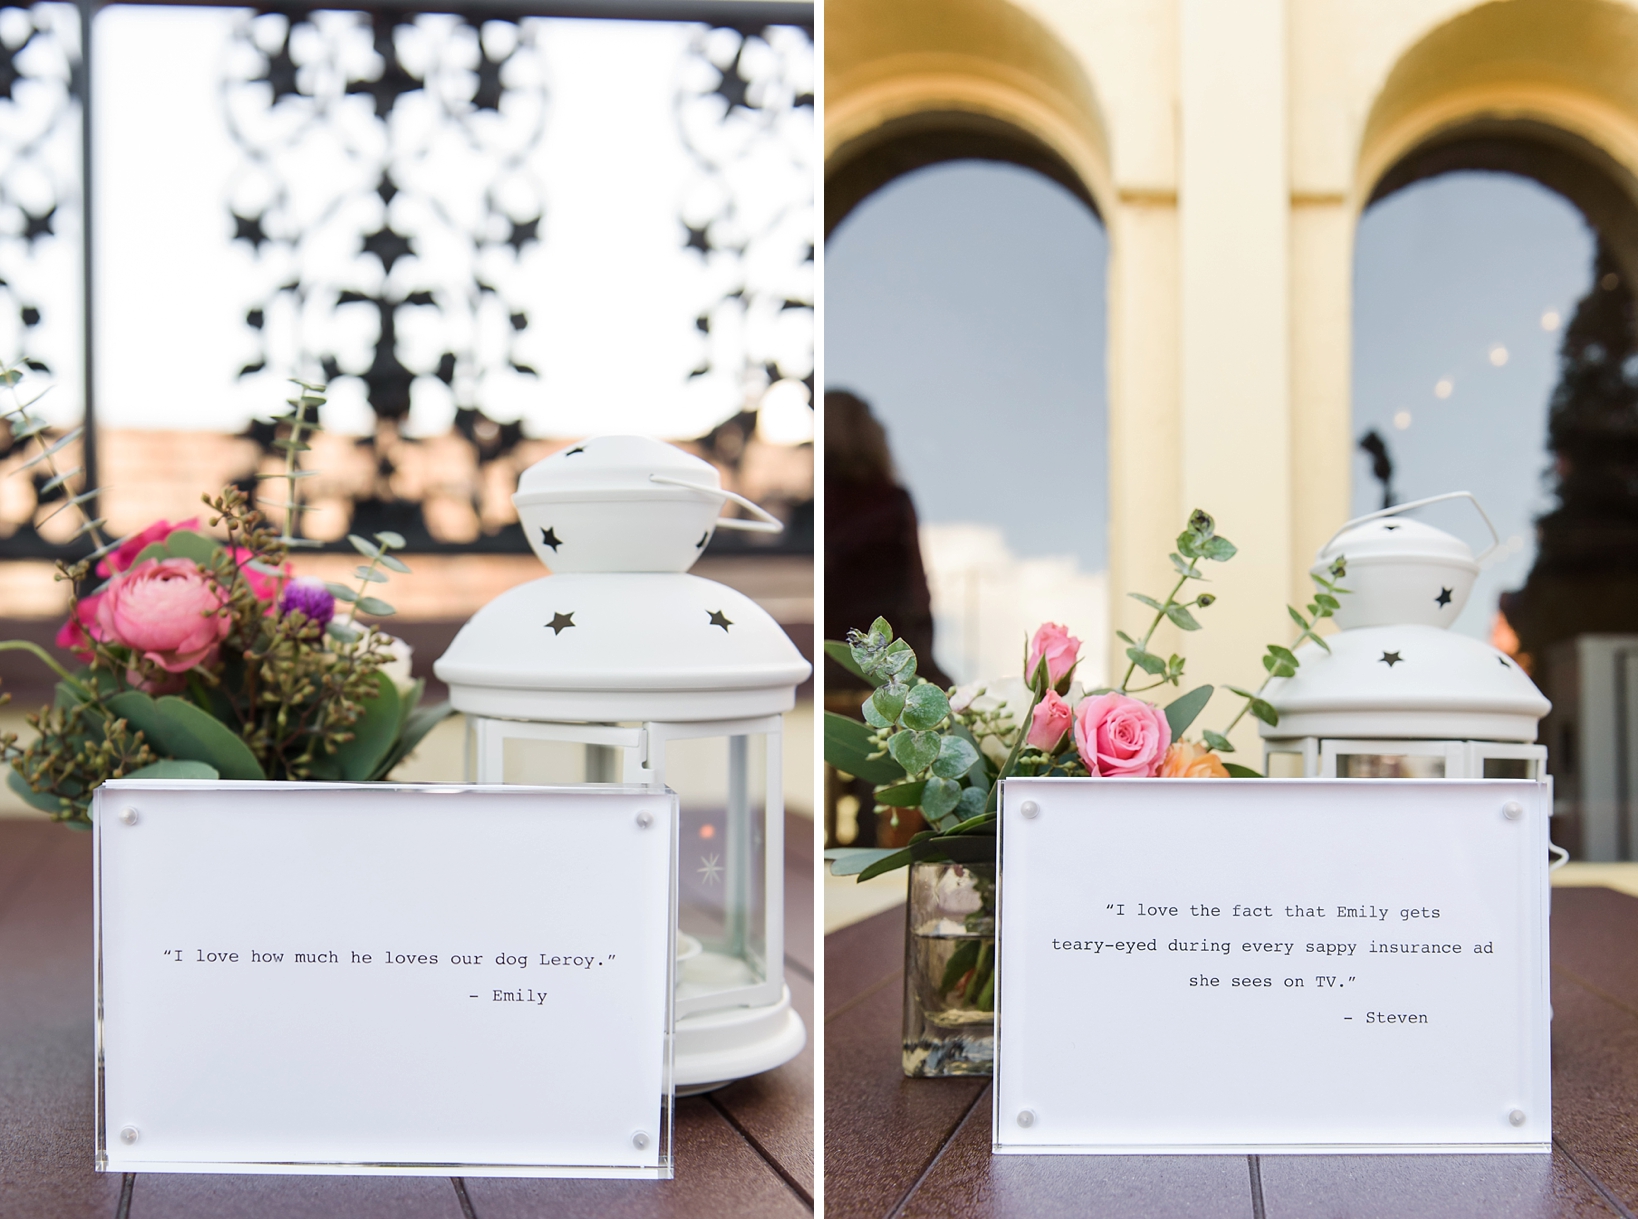 Framed quotes from the bride and groom around the ceremony space